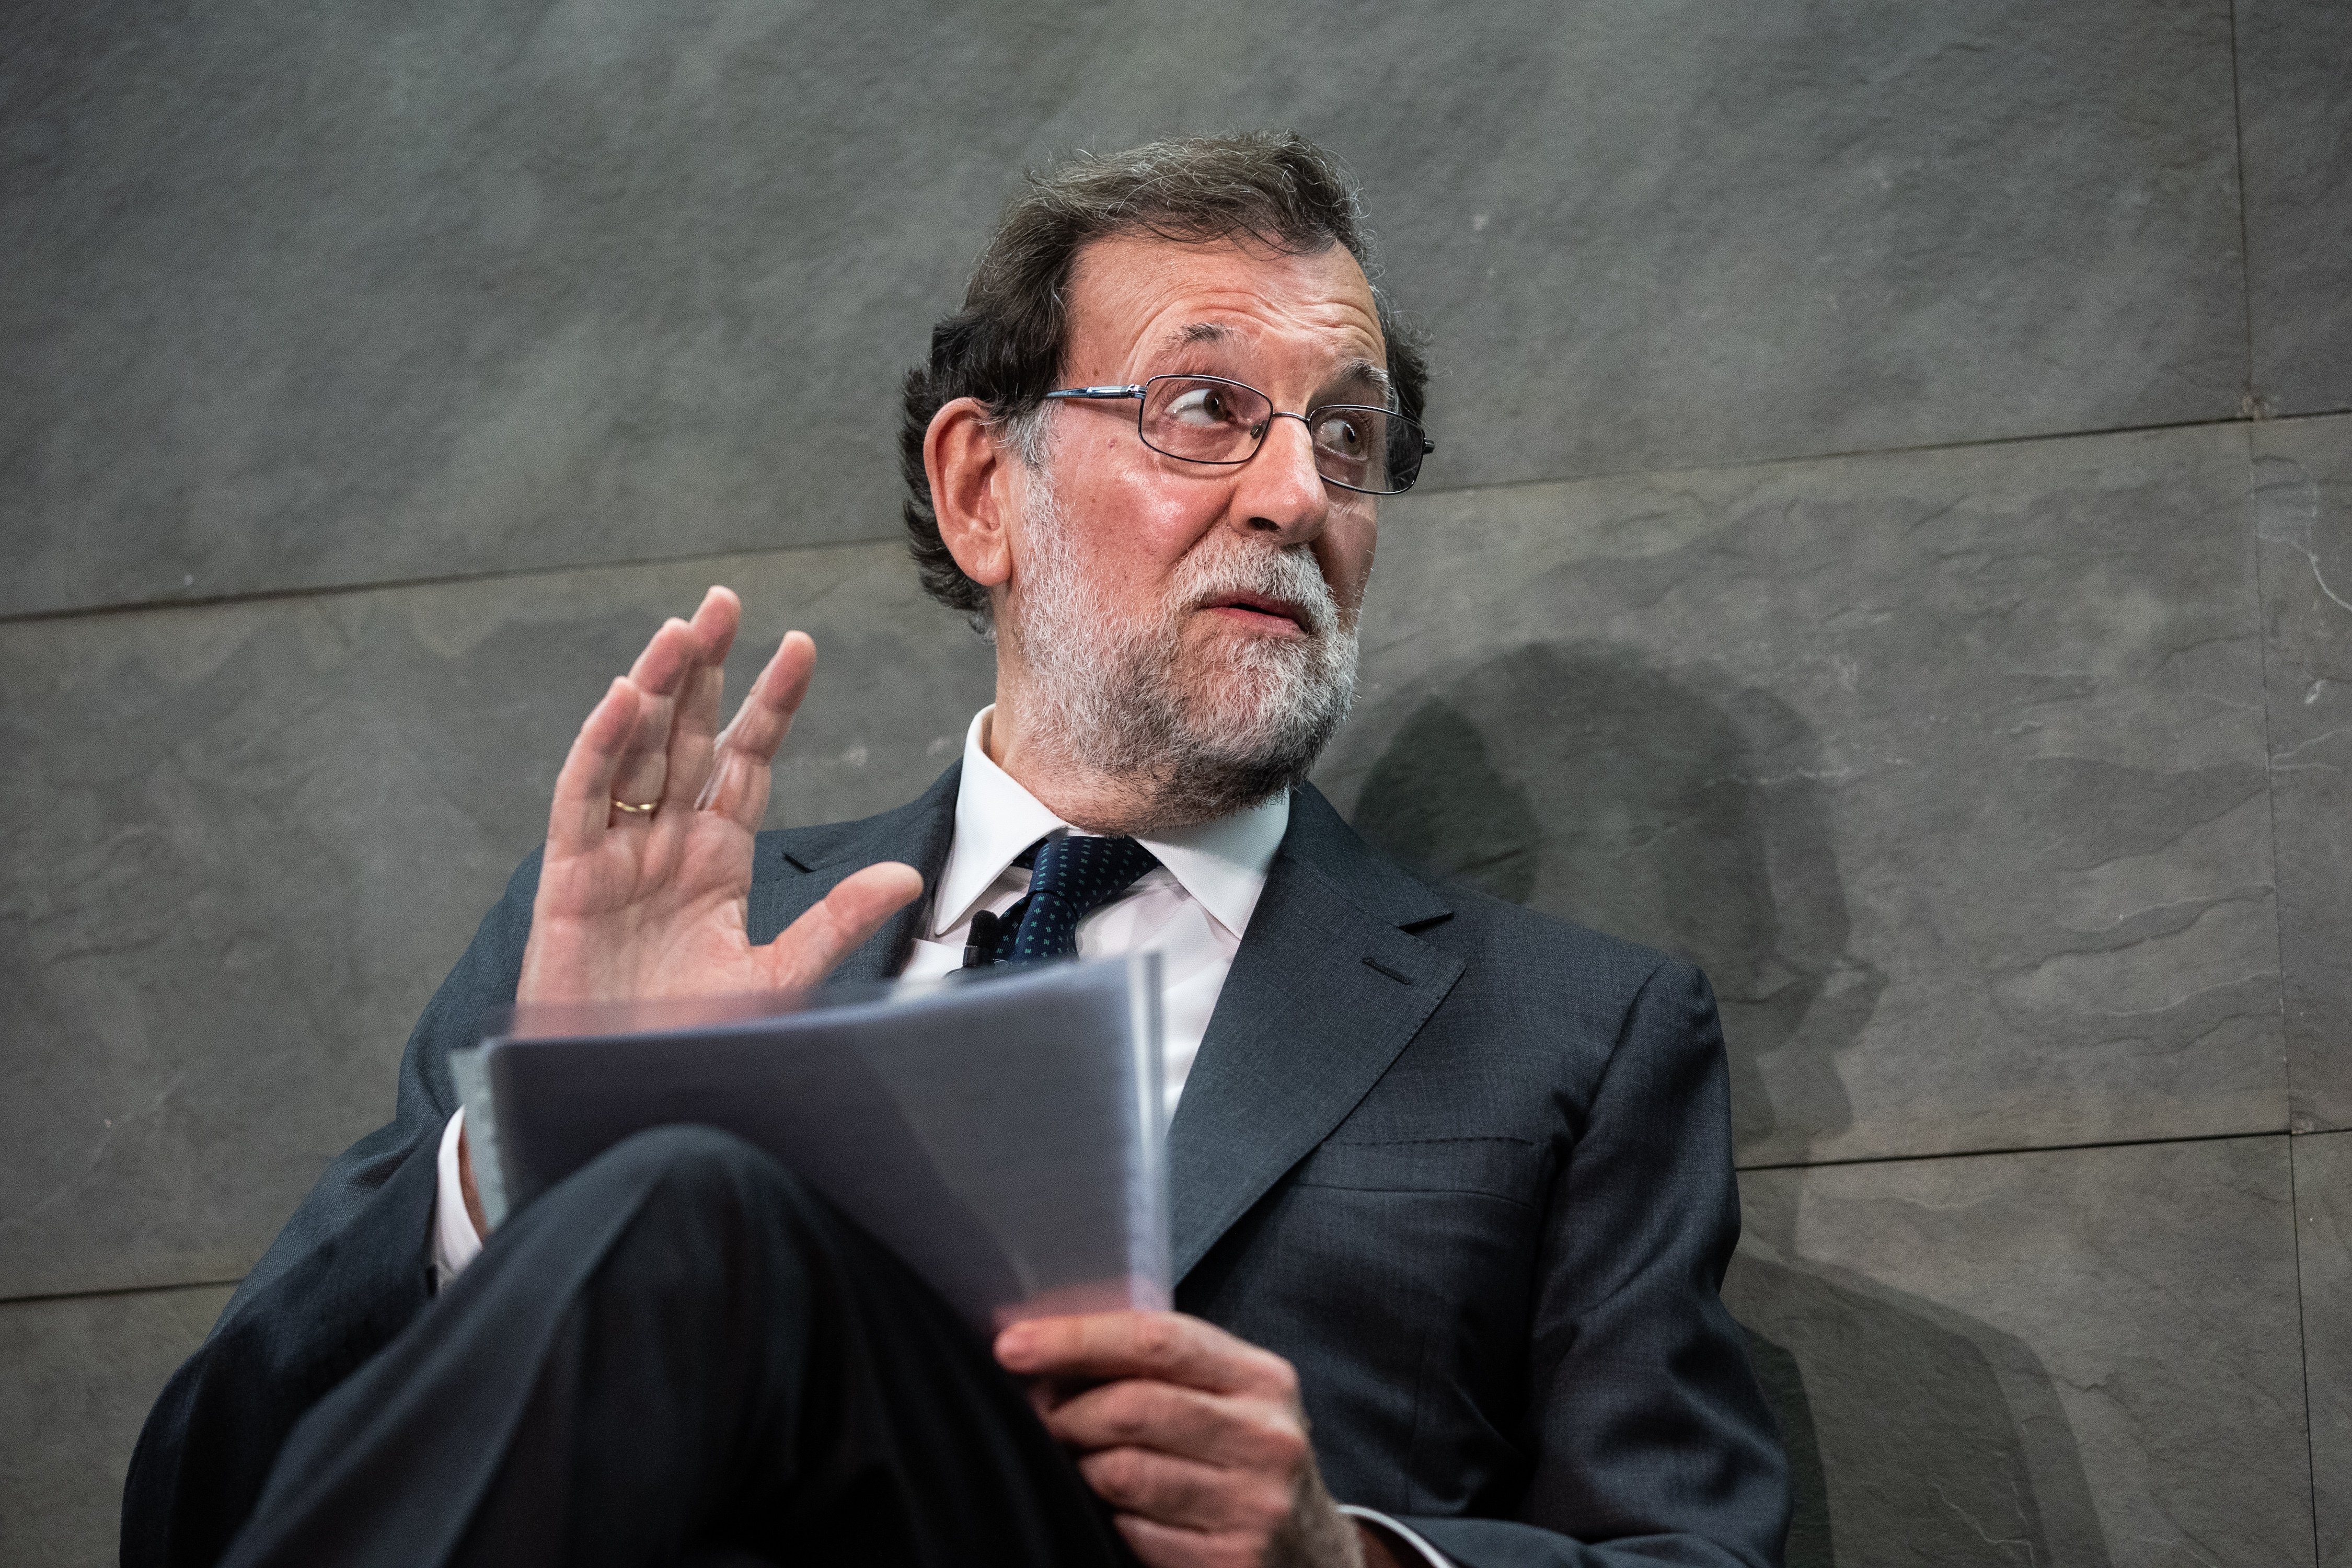 Rajoy's government "blatantly assaulted Andorran sovereignty", say plaintiffs